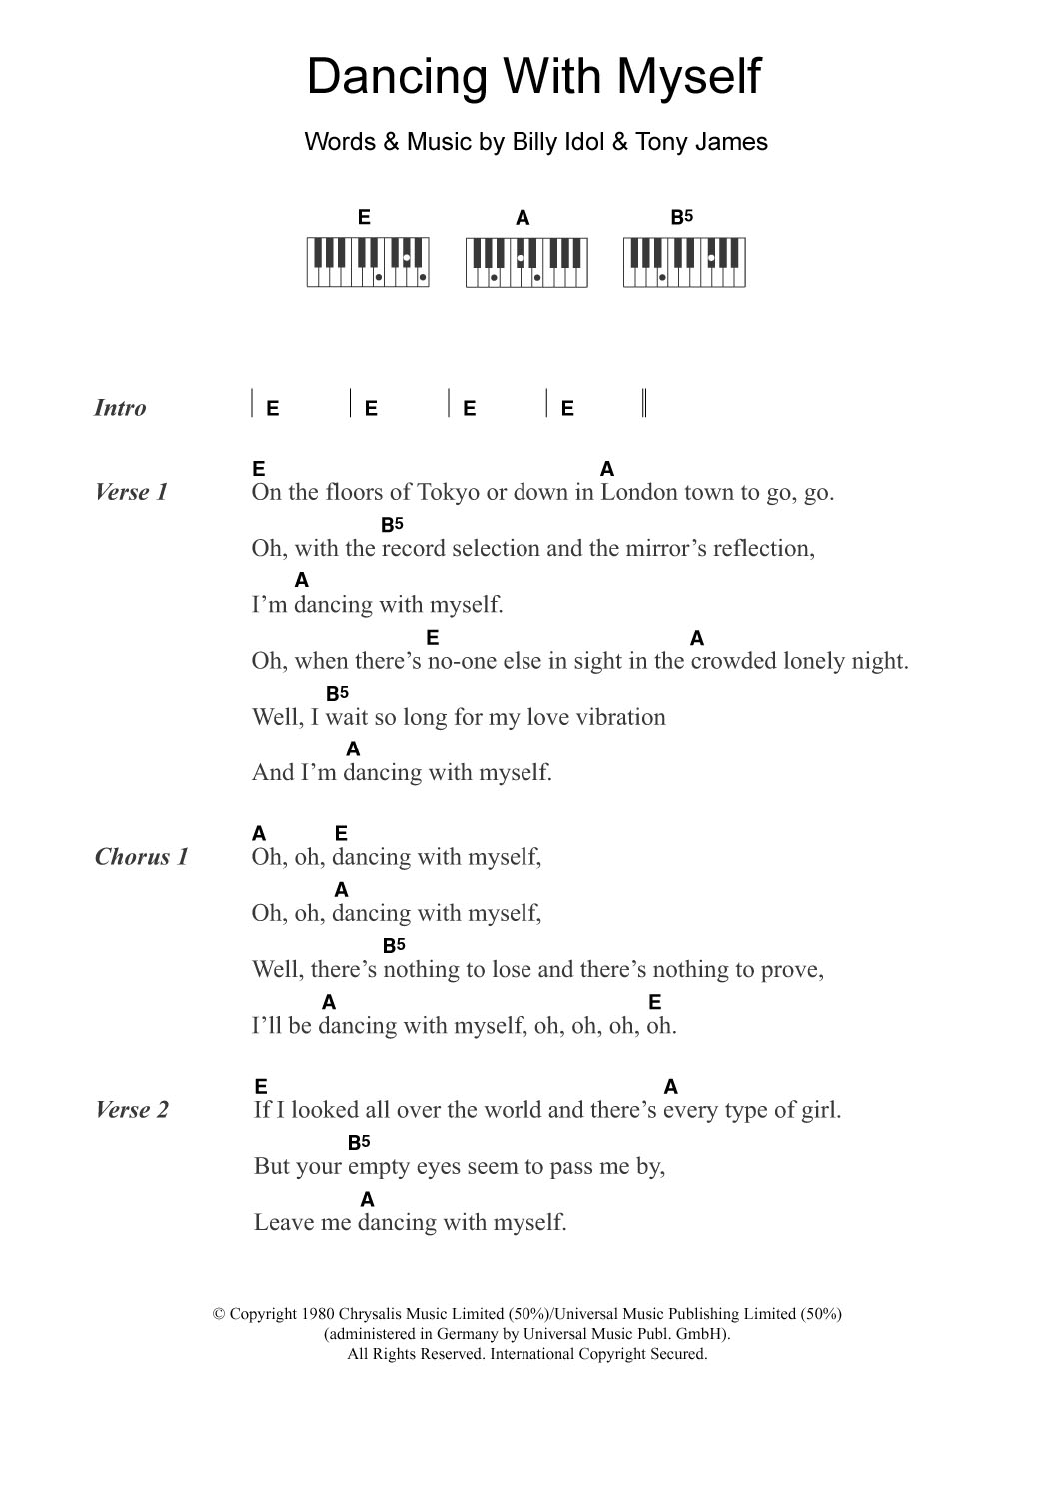 Download Generation X Dancing With Myself Sheet Music